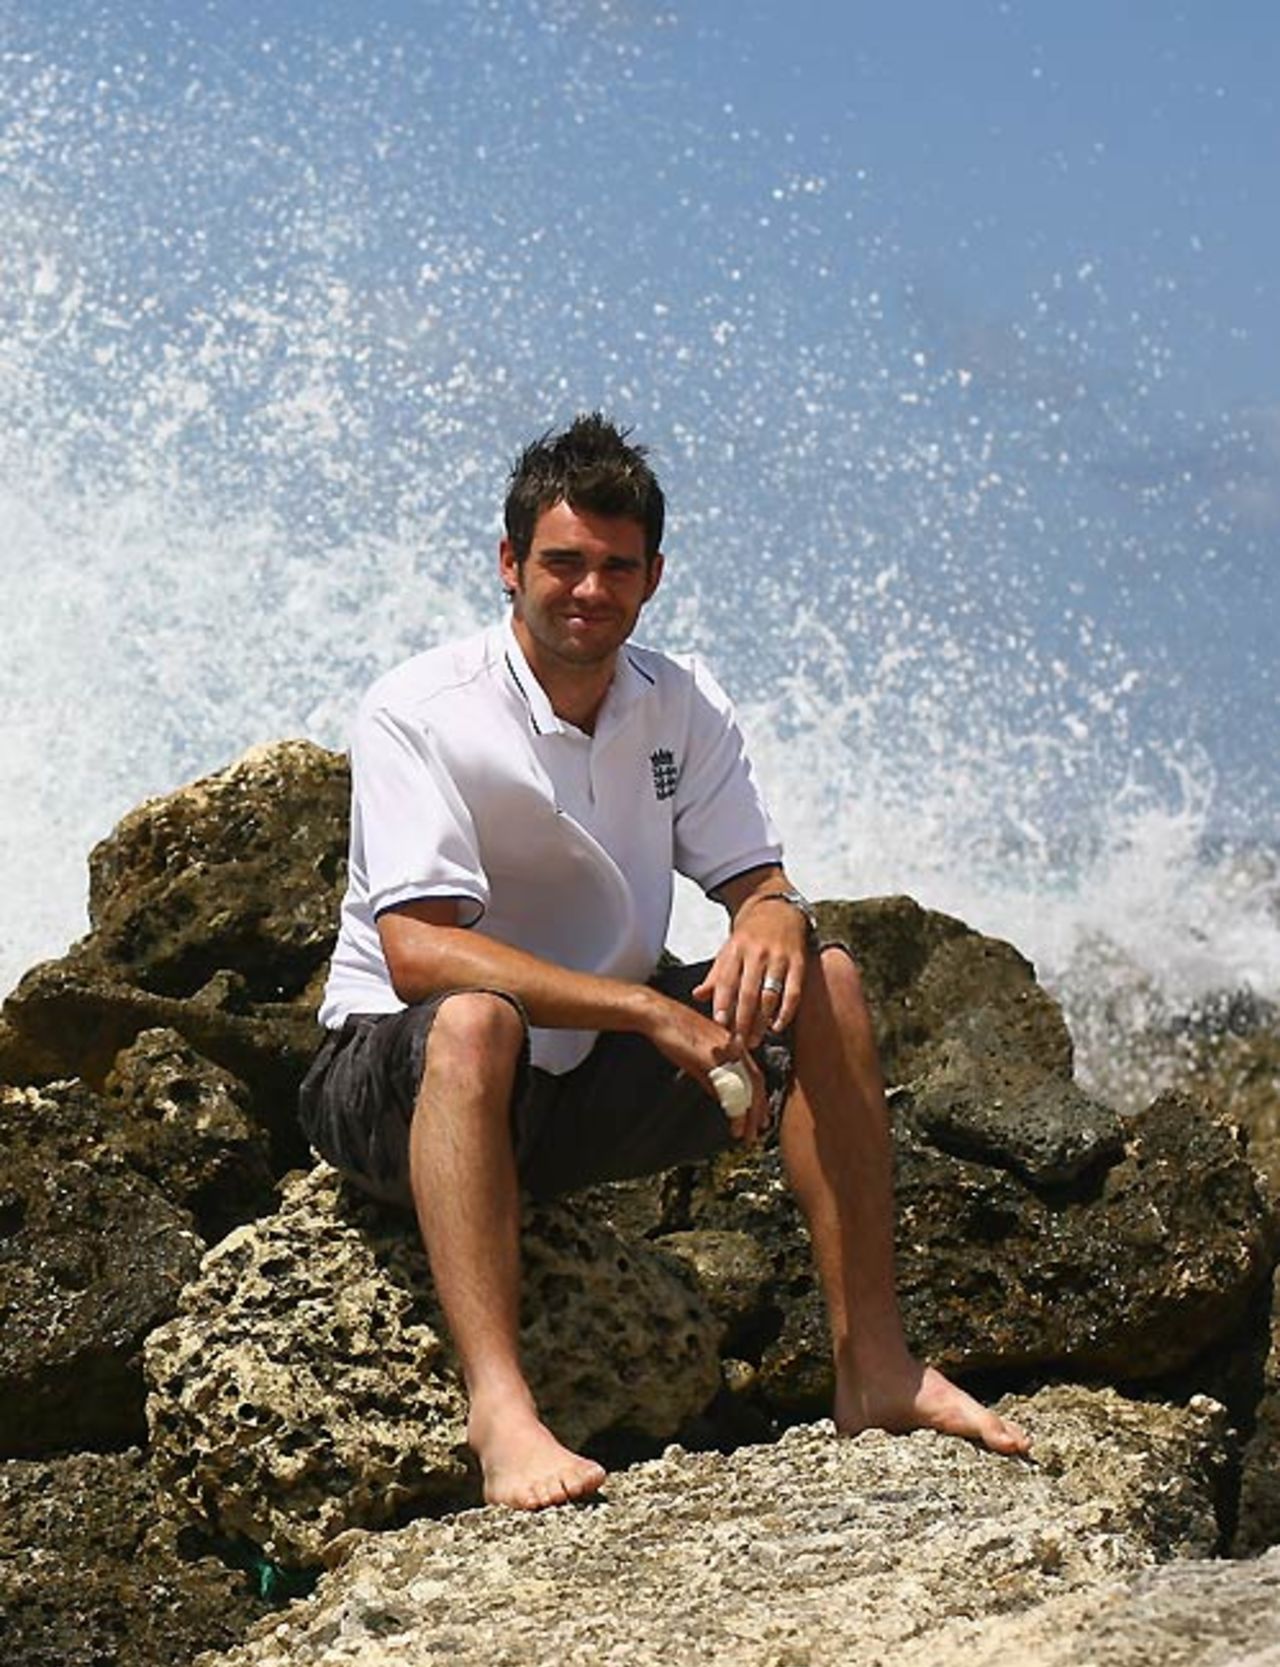 James Anderson sits amongst the rocks and waves outside the Hilton hotel, Barbados, April 12, 2007